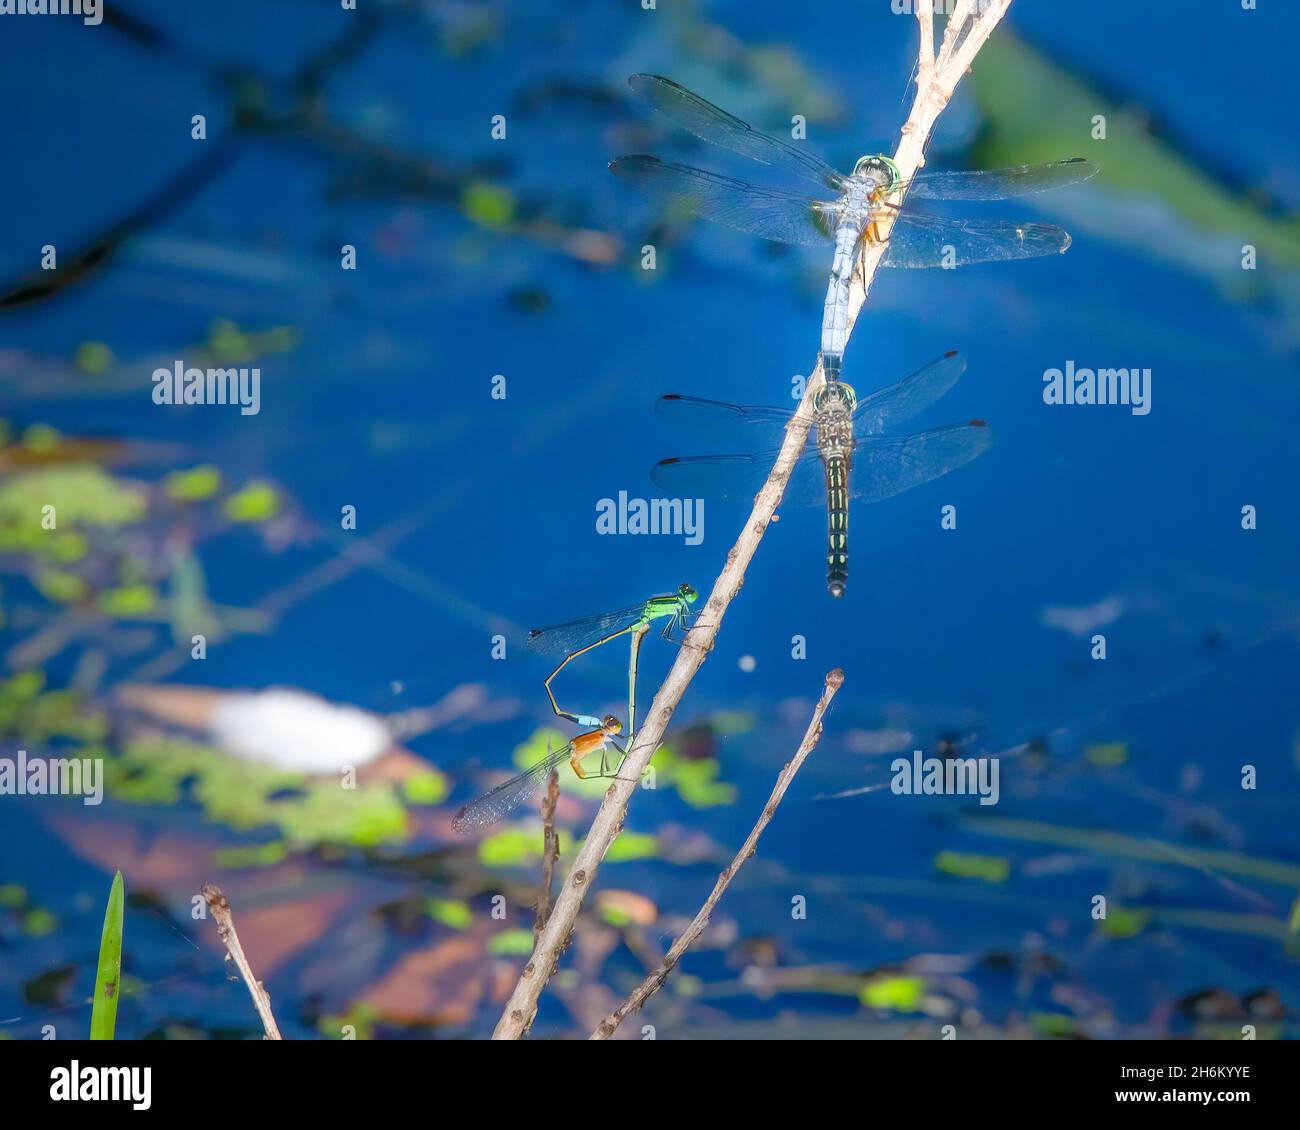 Two sets of dragonflies mating by a small pond in the Florida Everglades. Stock Photo